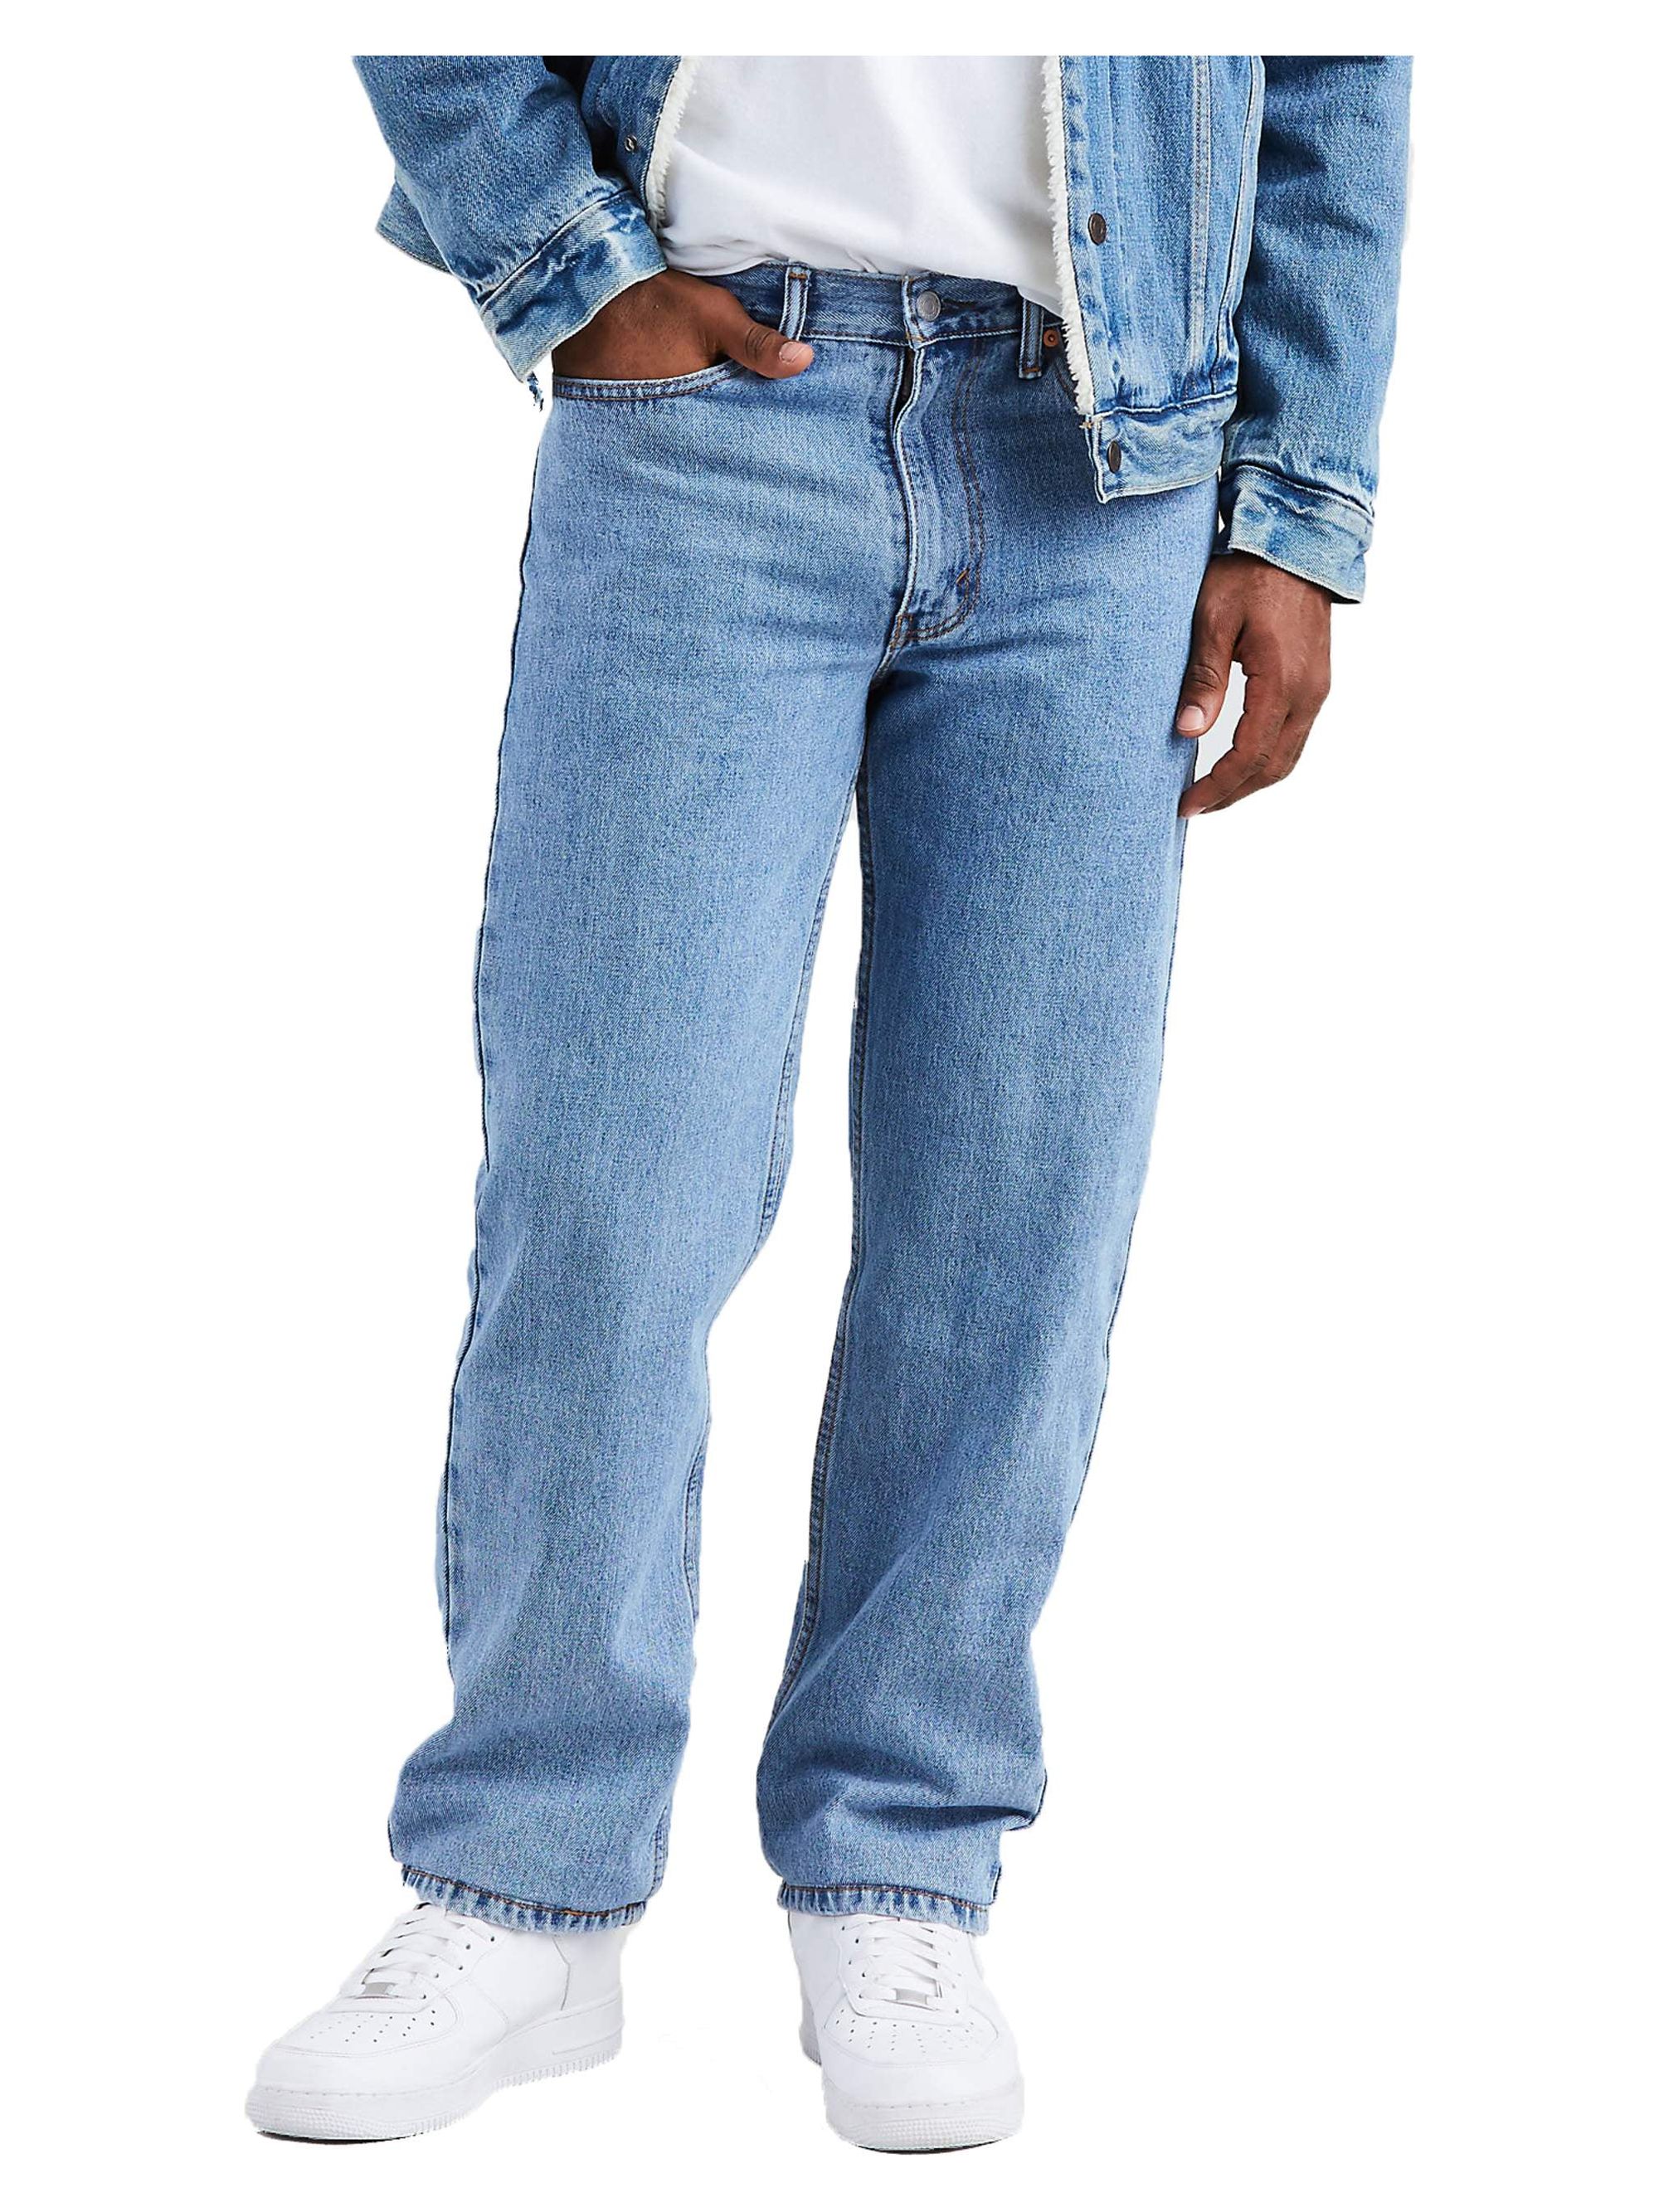 Levi's Men's 550 Relaxed Fit Jeans - image 1 of 7